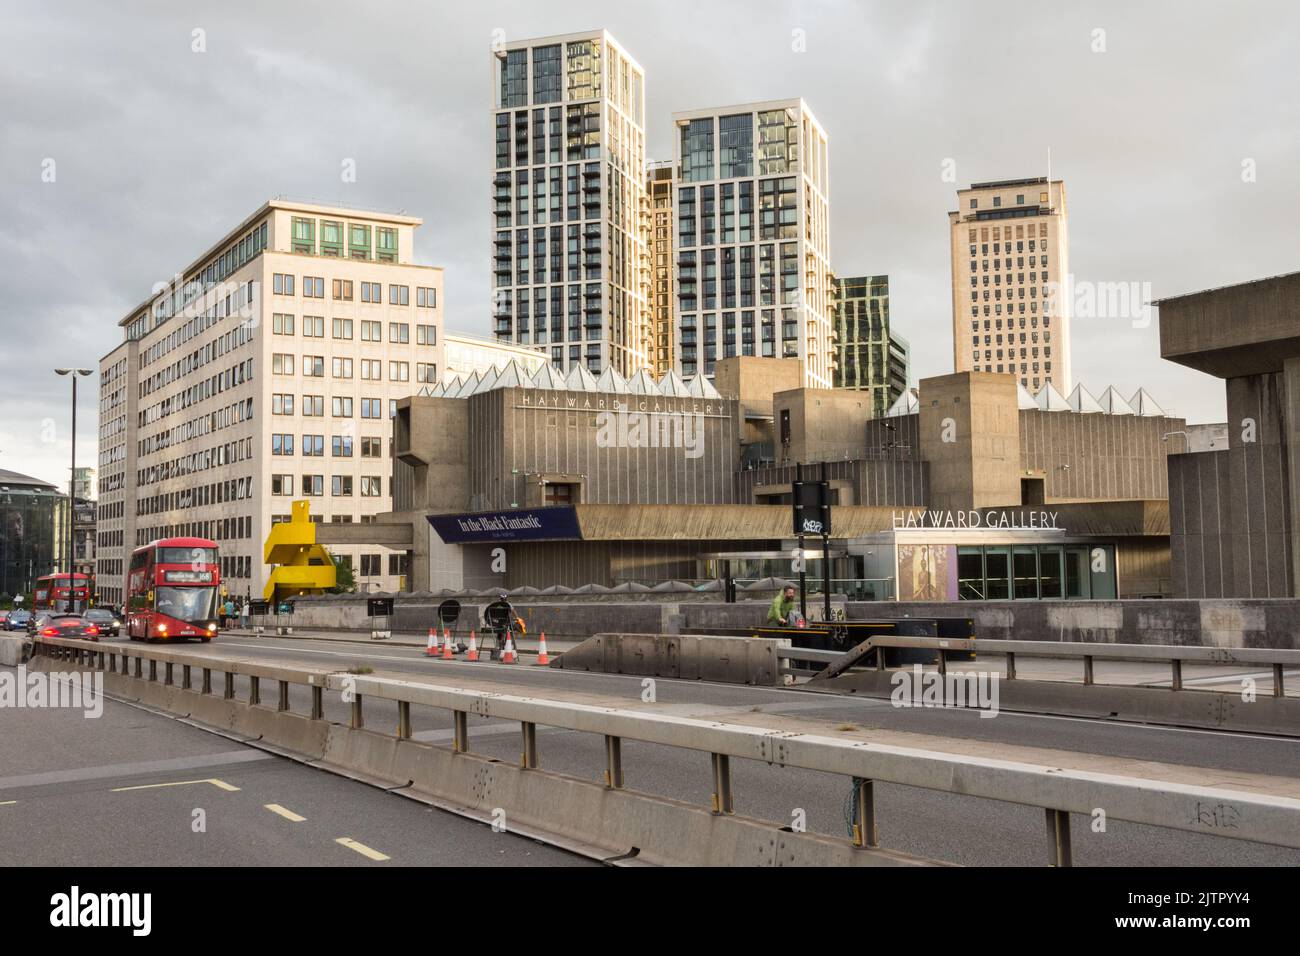 The Hayward Gallery and new apartments and offices on the South Bank Centre as seen from Waterloo Bridge, London, SE1, England, UK Stock Photo